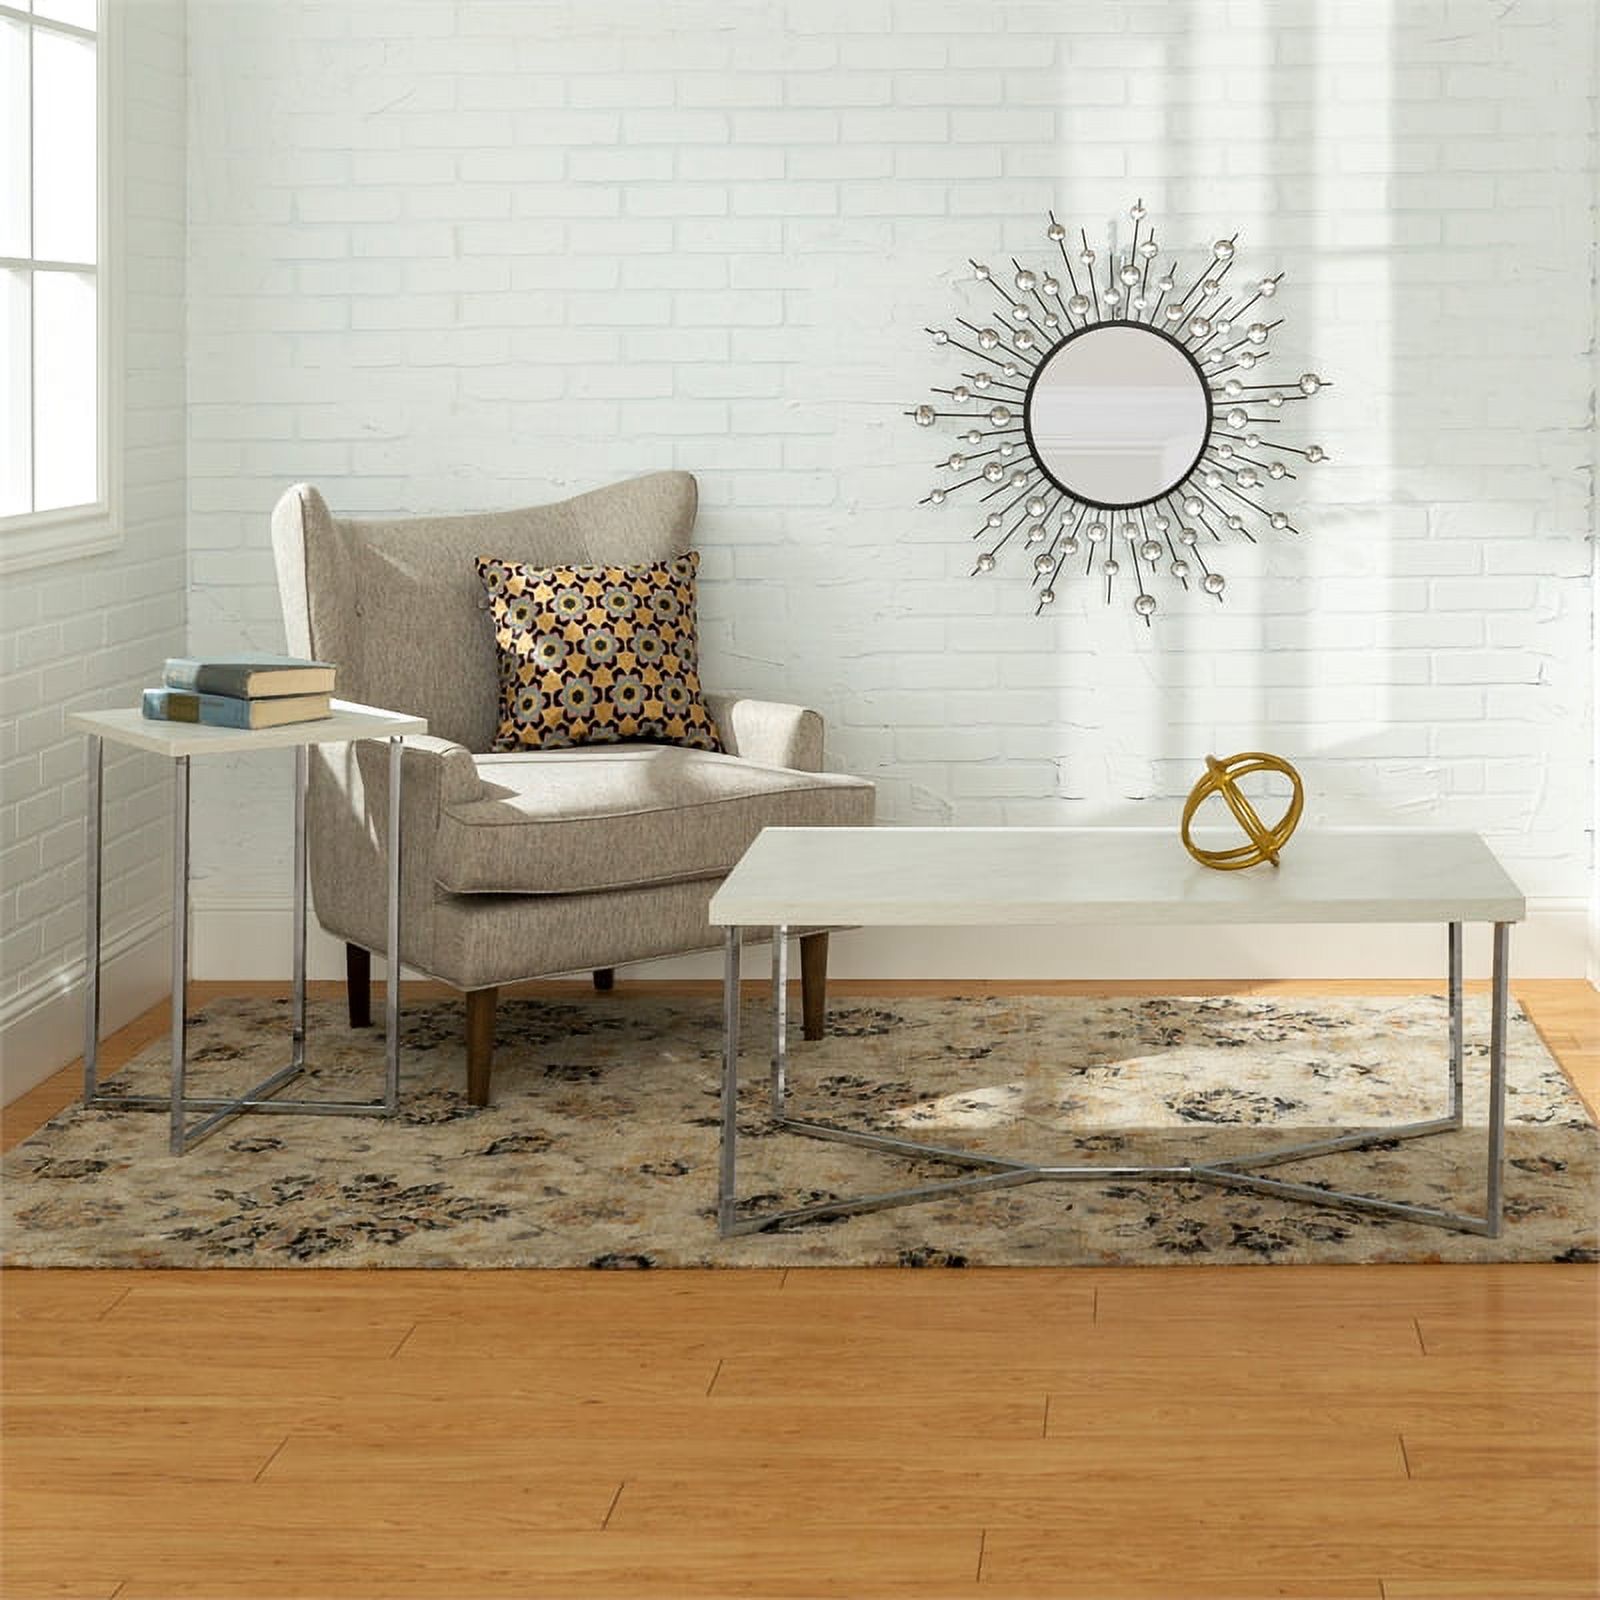 2-Piece Coffee Table Set - White Faux Marble and Chrome - image 1 of 2